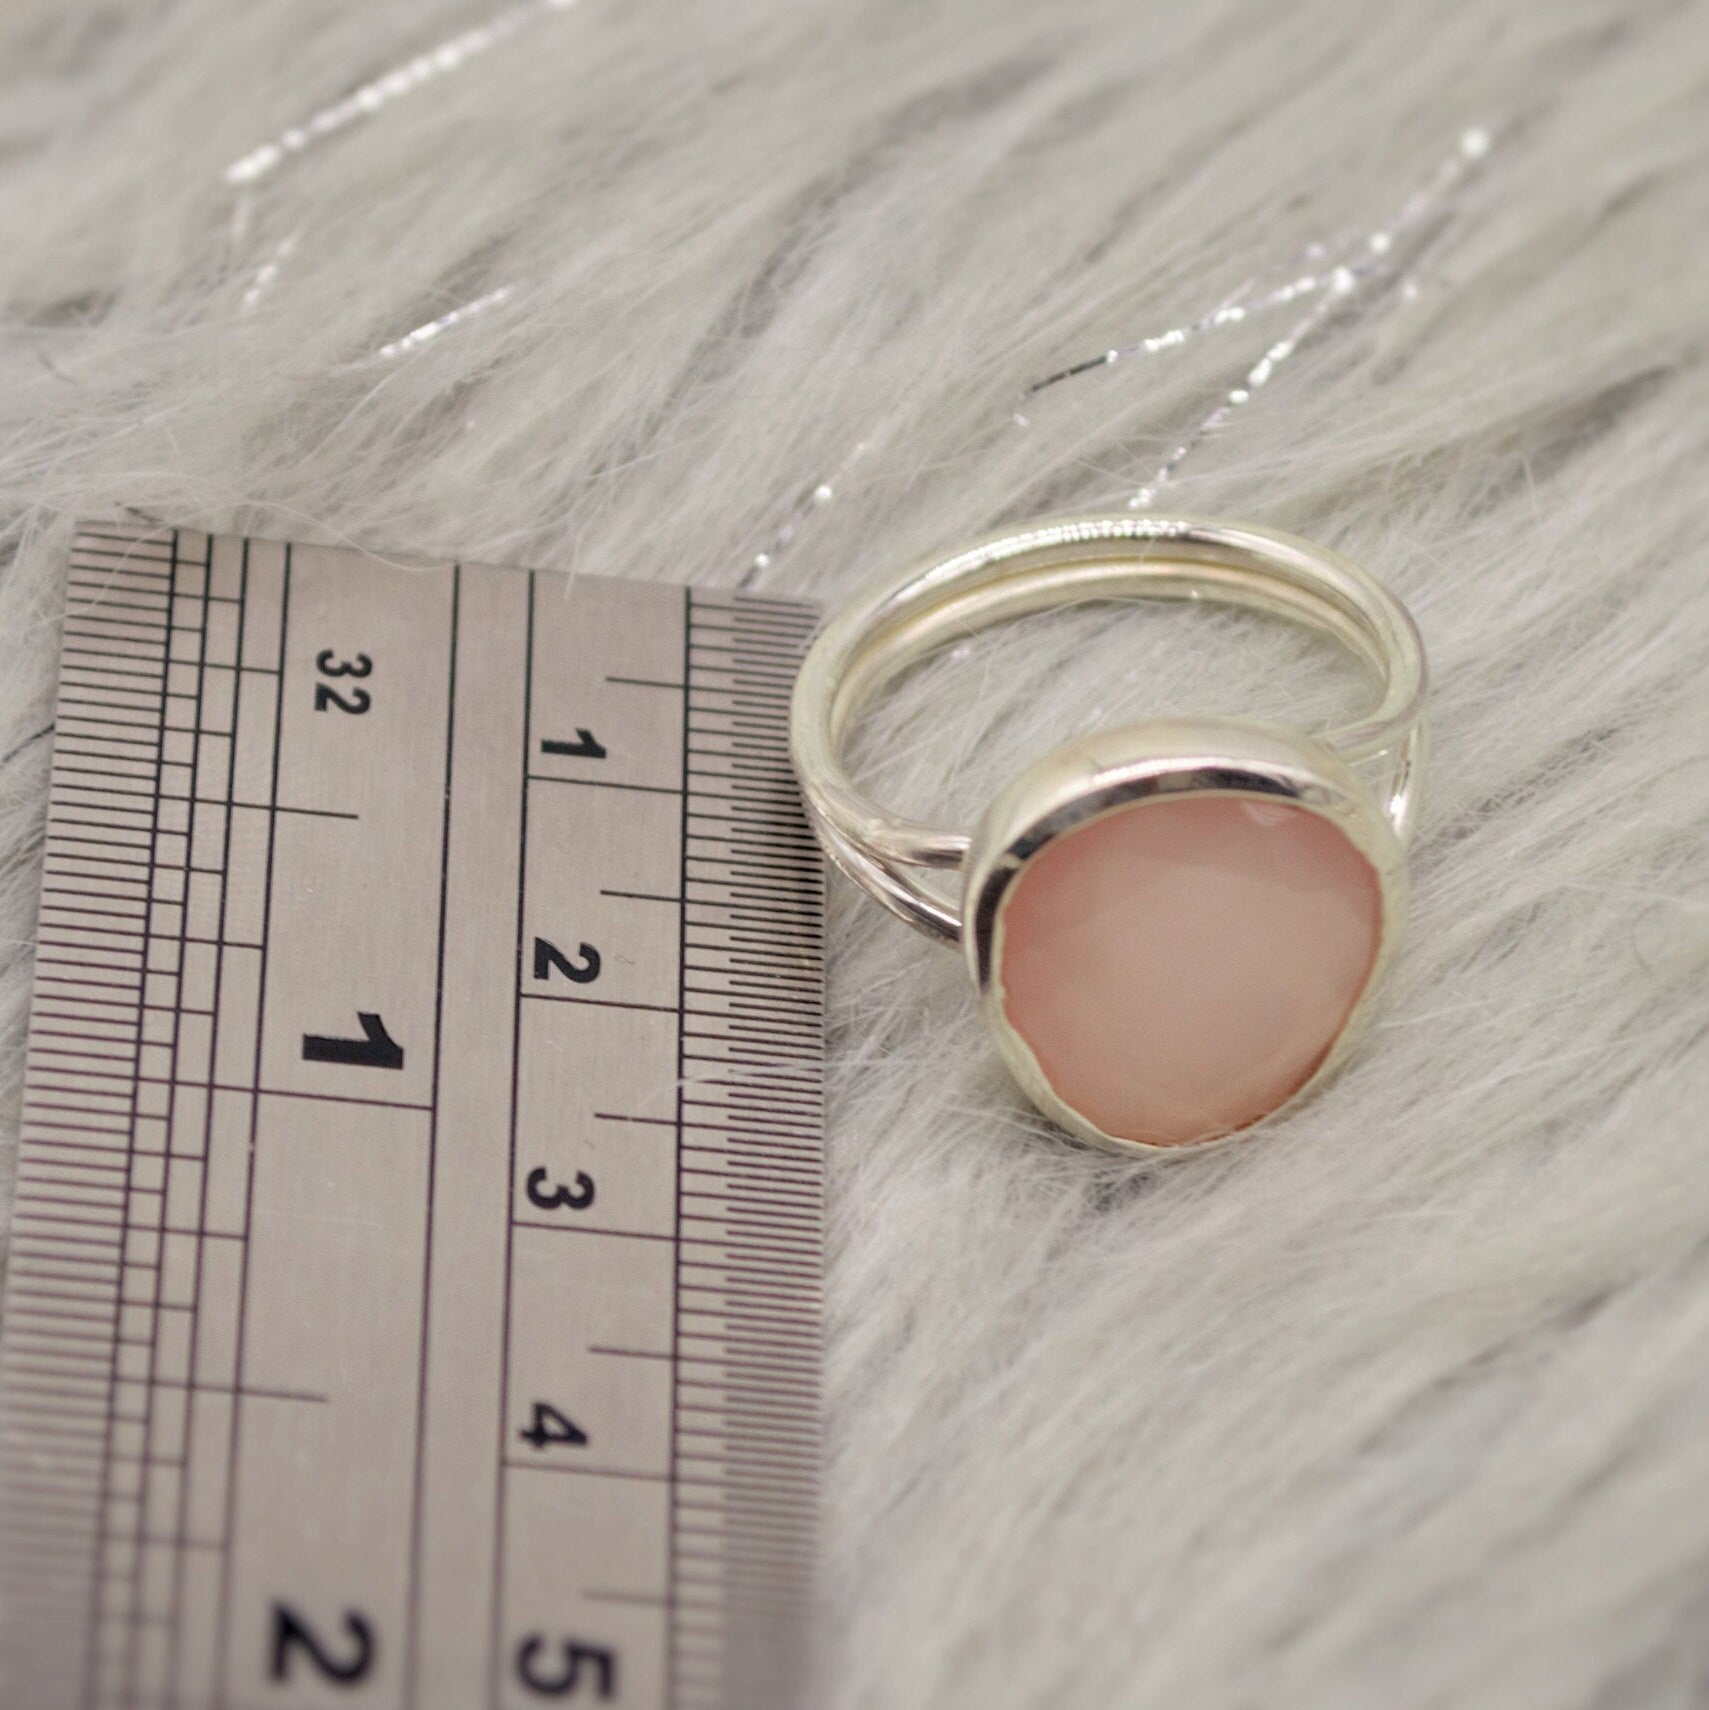 Big Rose Quartz Ring, Sterling Silver Ring, Rose Quartz Jewelry, Pink Rings, Statement Rings For Women, Gifts For Her, Heart Chakra Ring